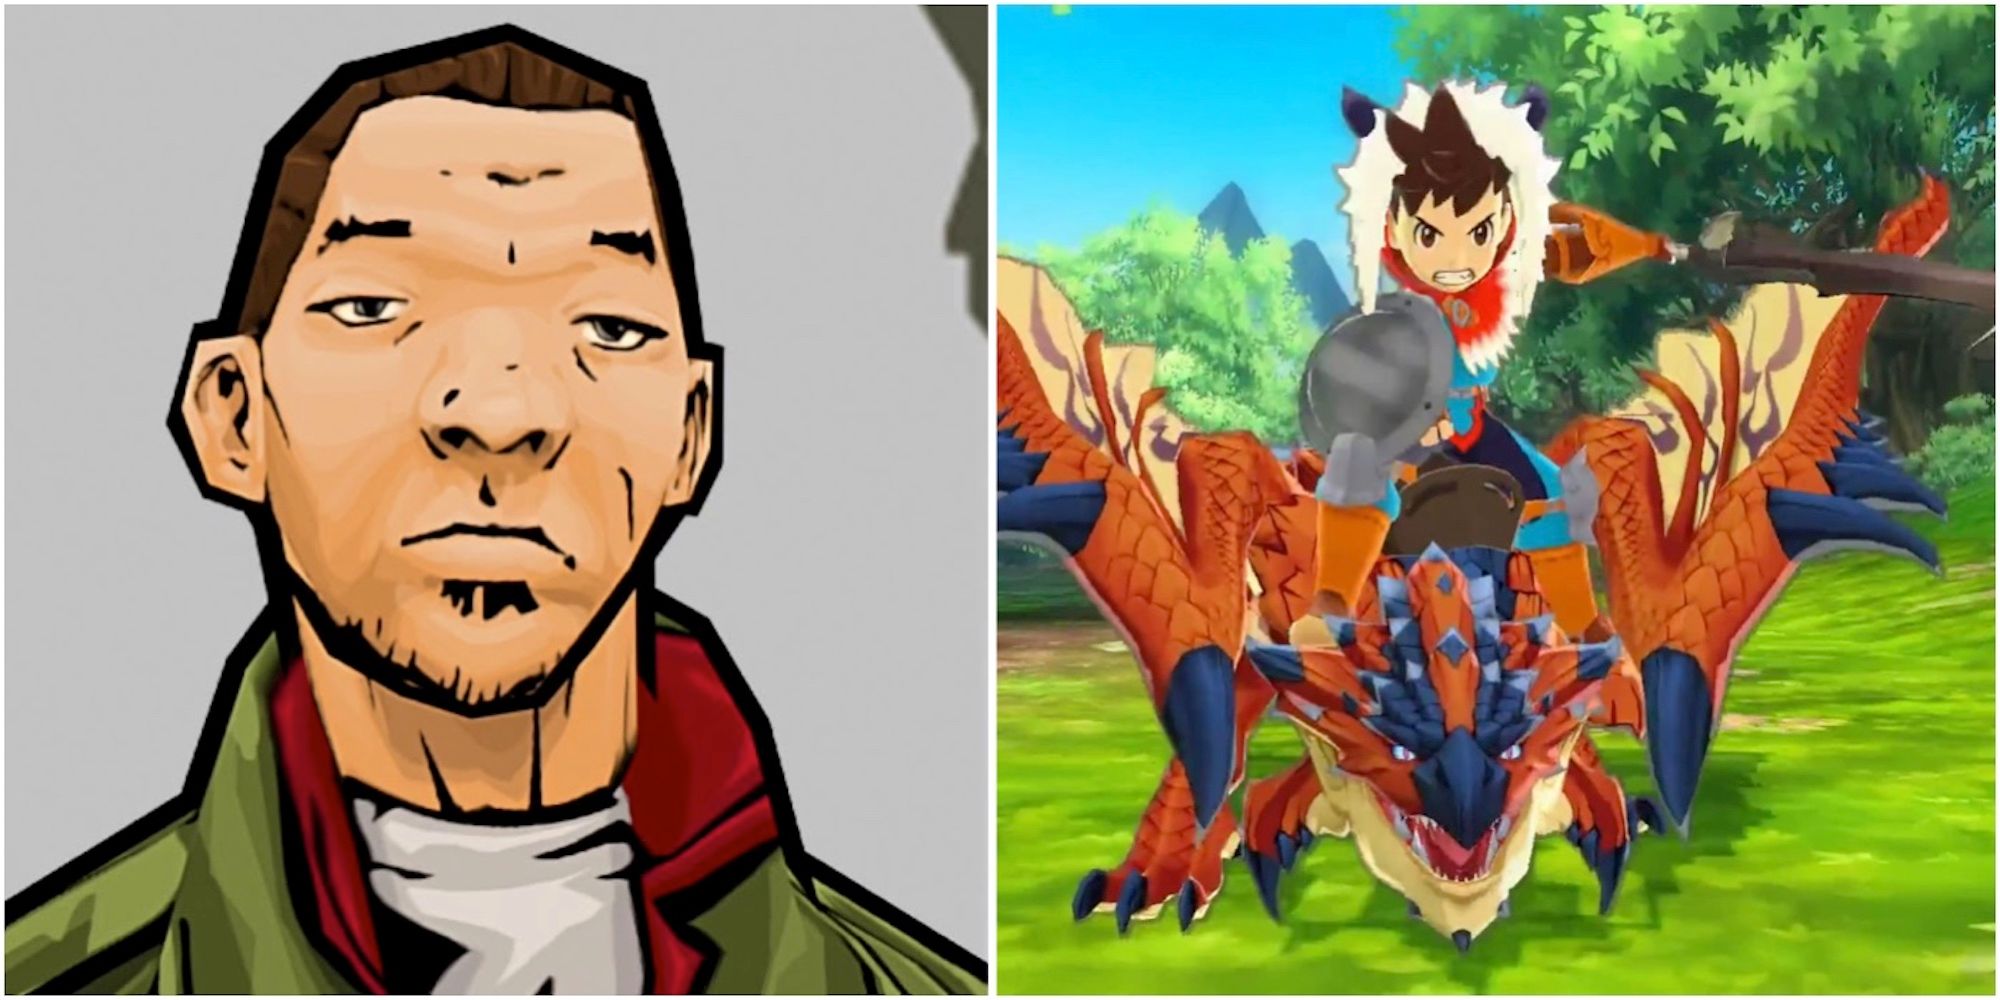 Huang Lee in Grand Theft Auto Chinatown Wars and the main character riding Ratha in Monster Hunter Stories